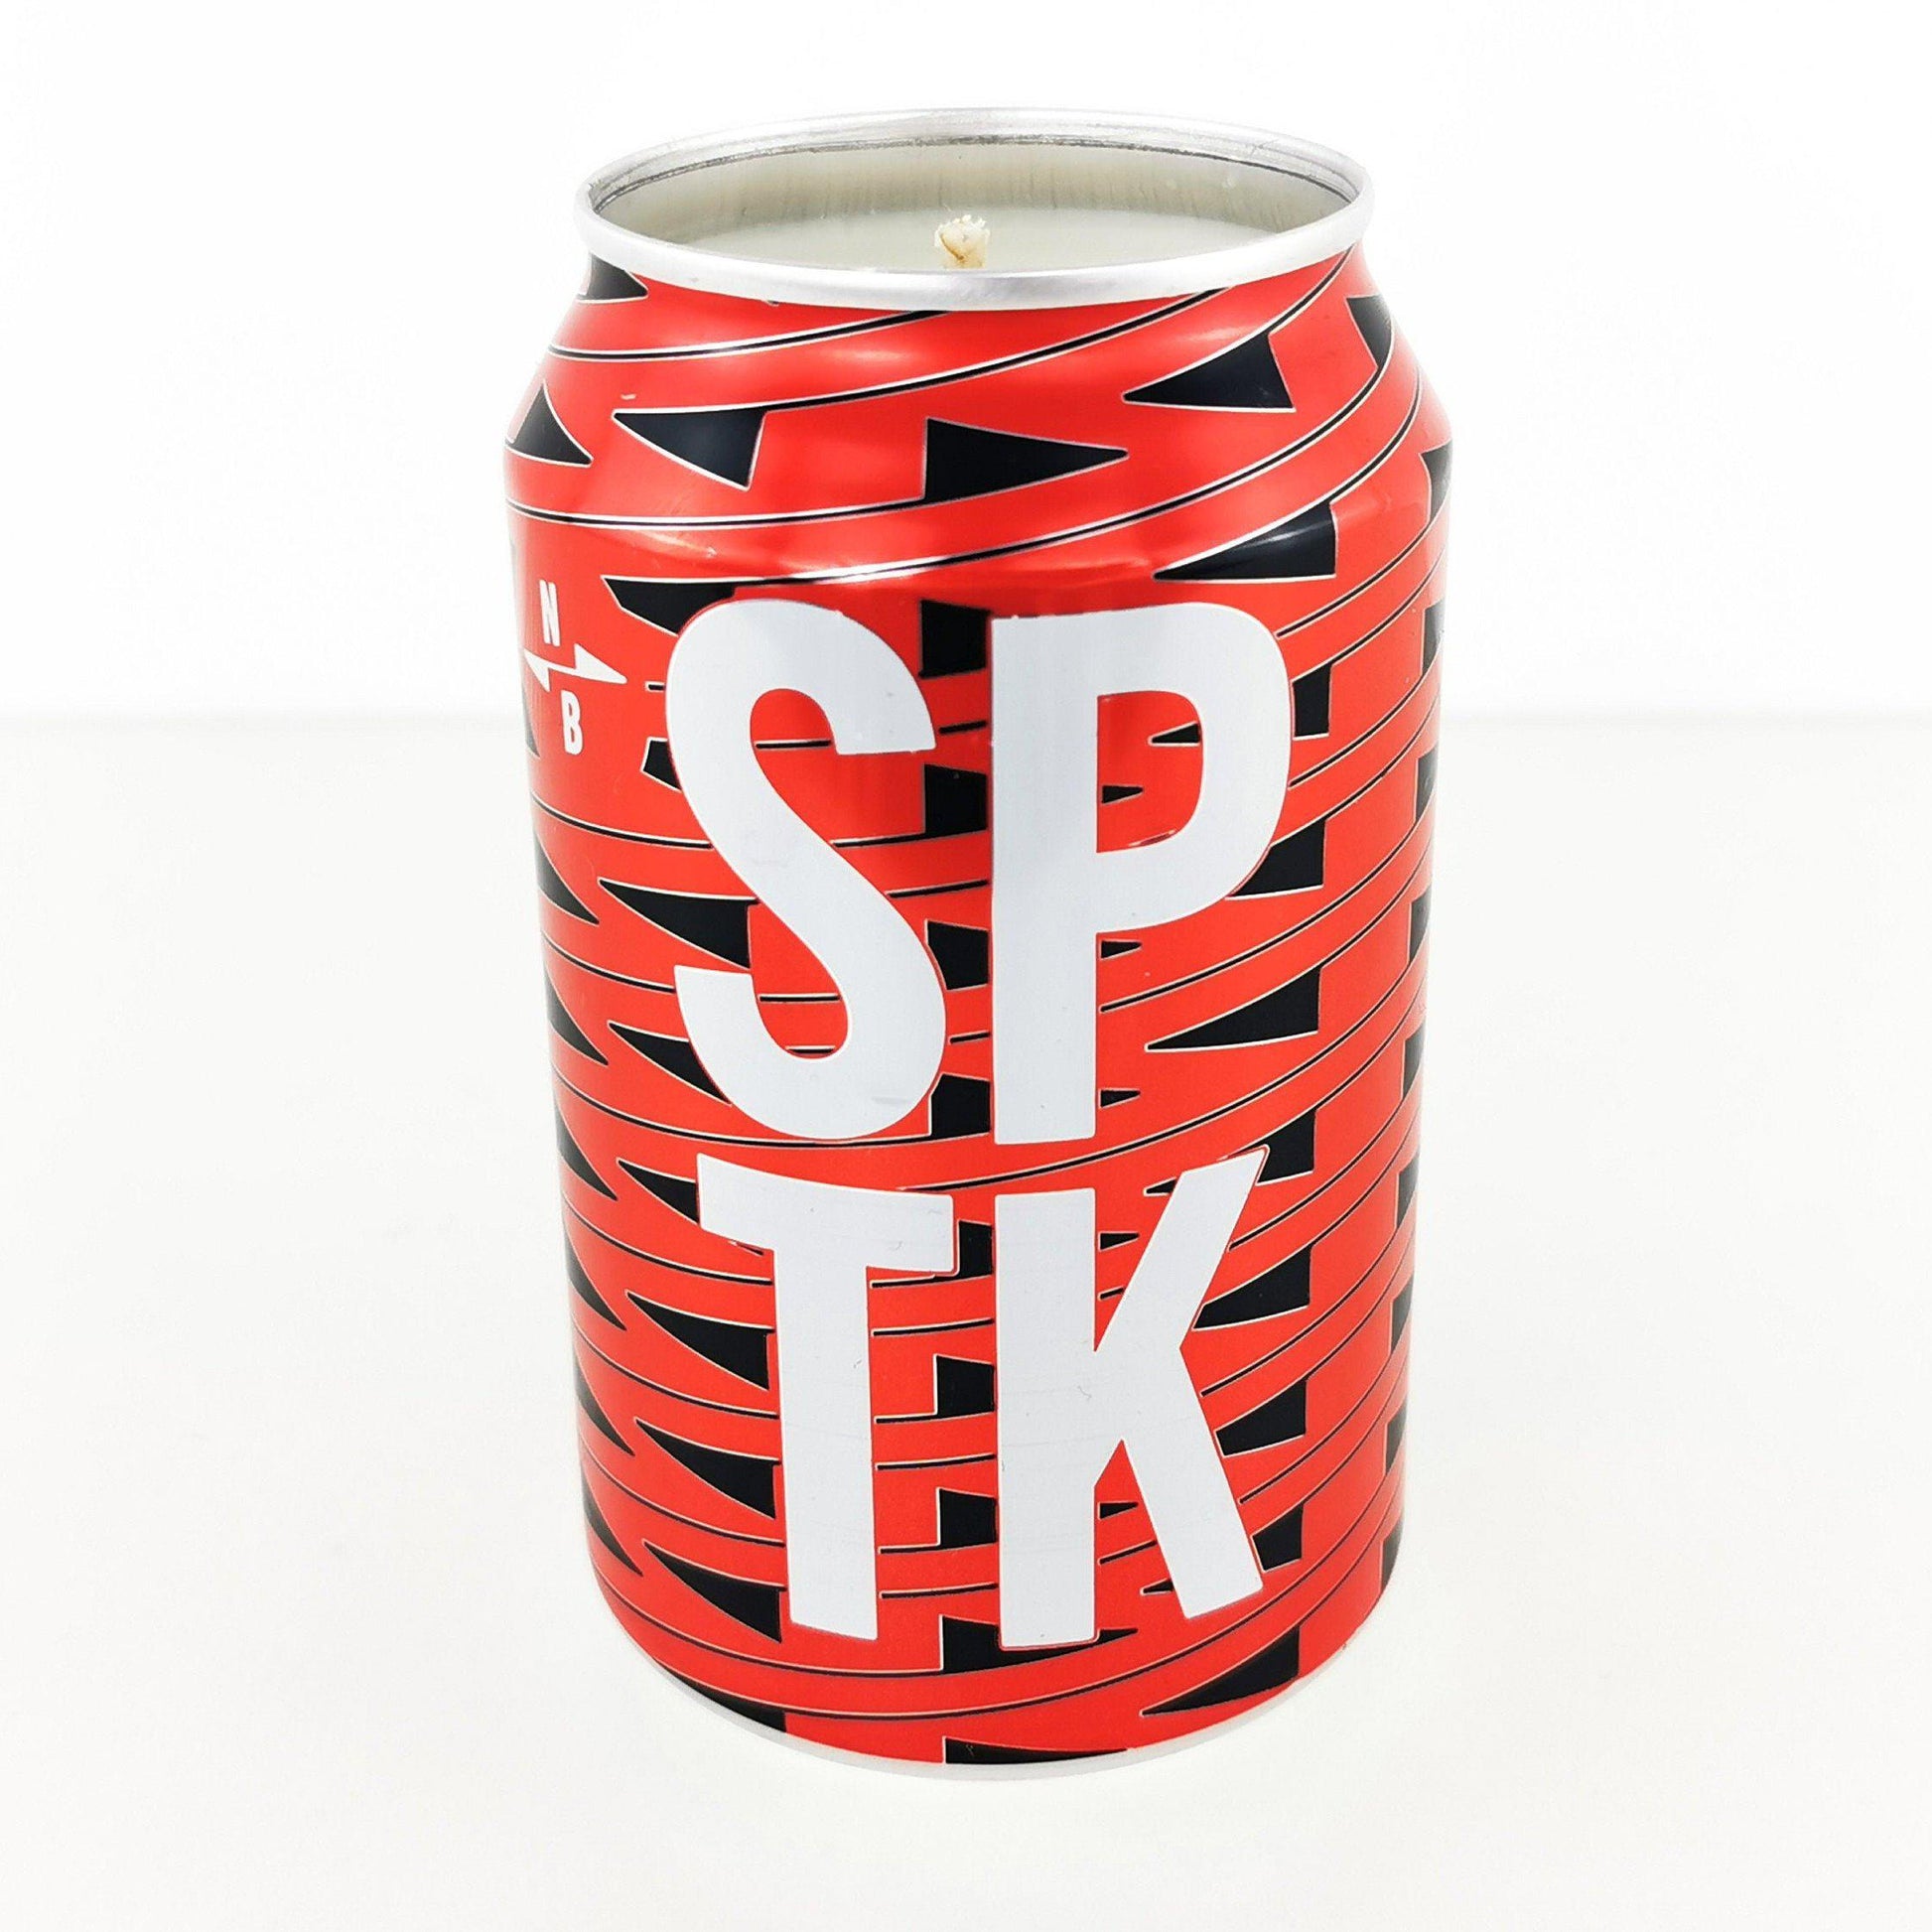 North Brewing Sputnik Craft Beer Can Candle-Beer Can Candles-Adhock Homeware